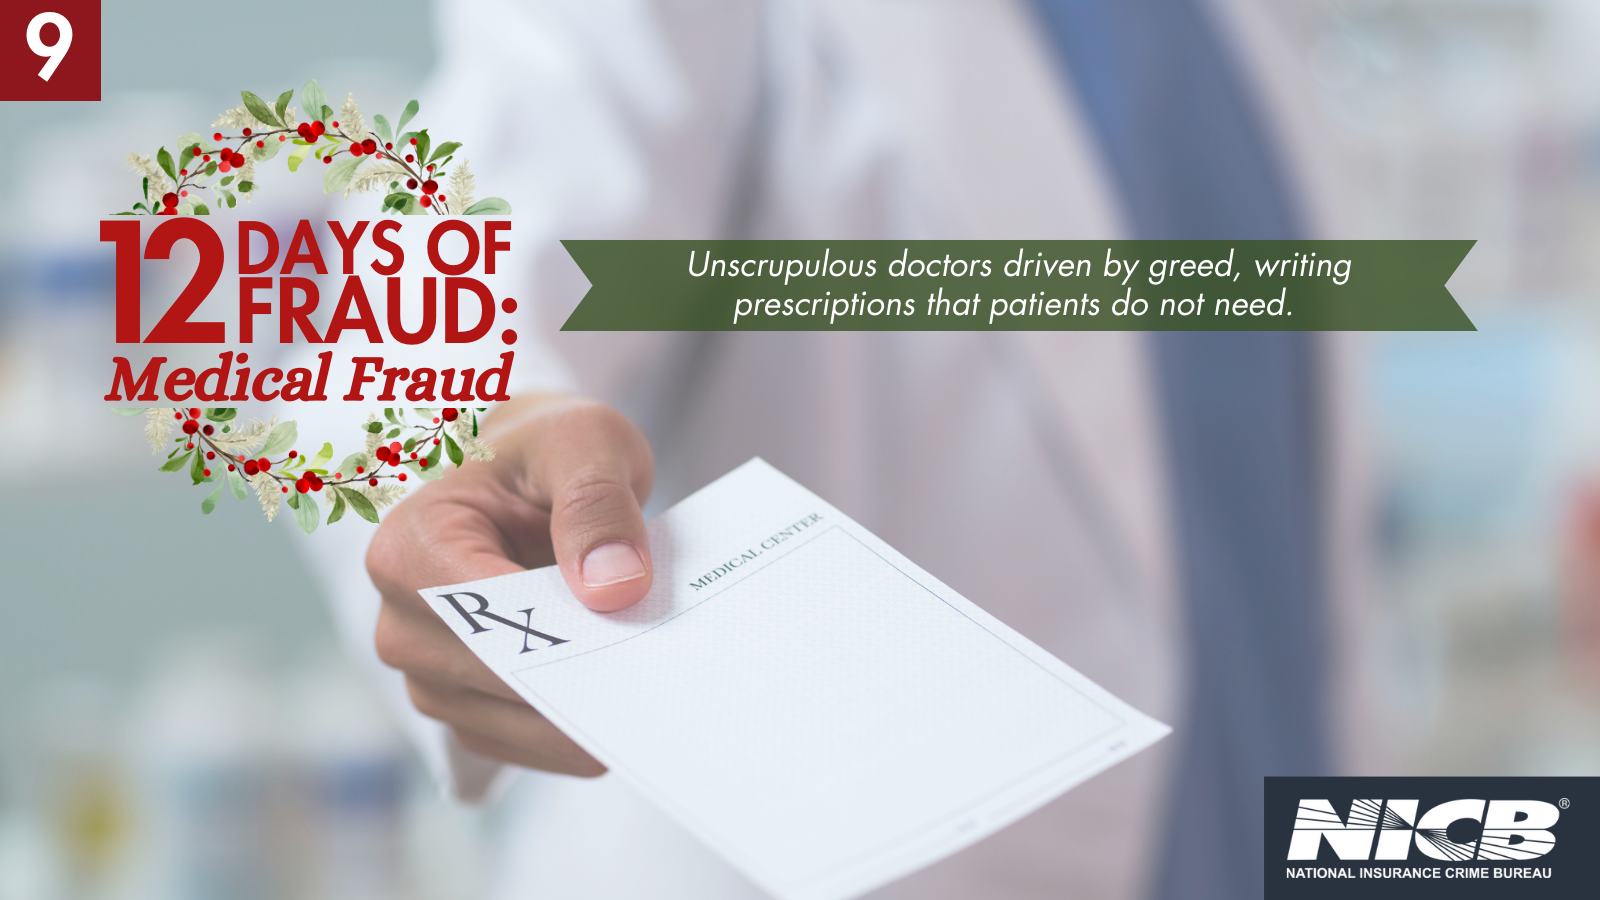 Unscrupulous doctors driven by greed, writing prescriptions that patients do not need.